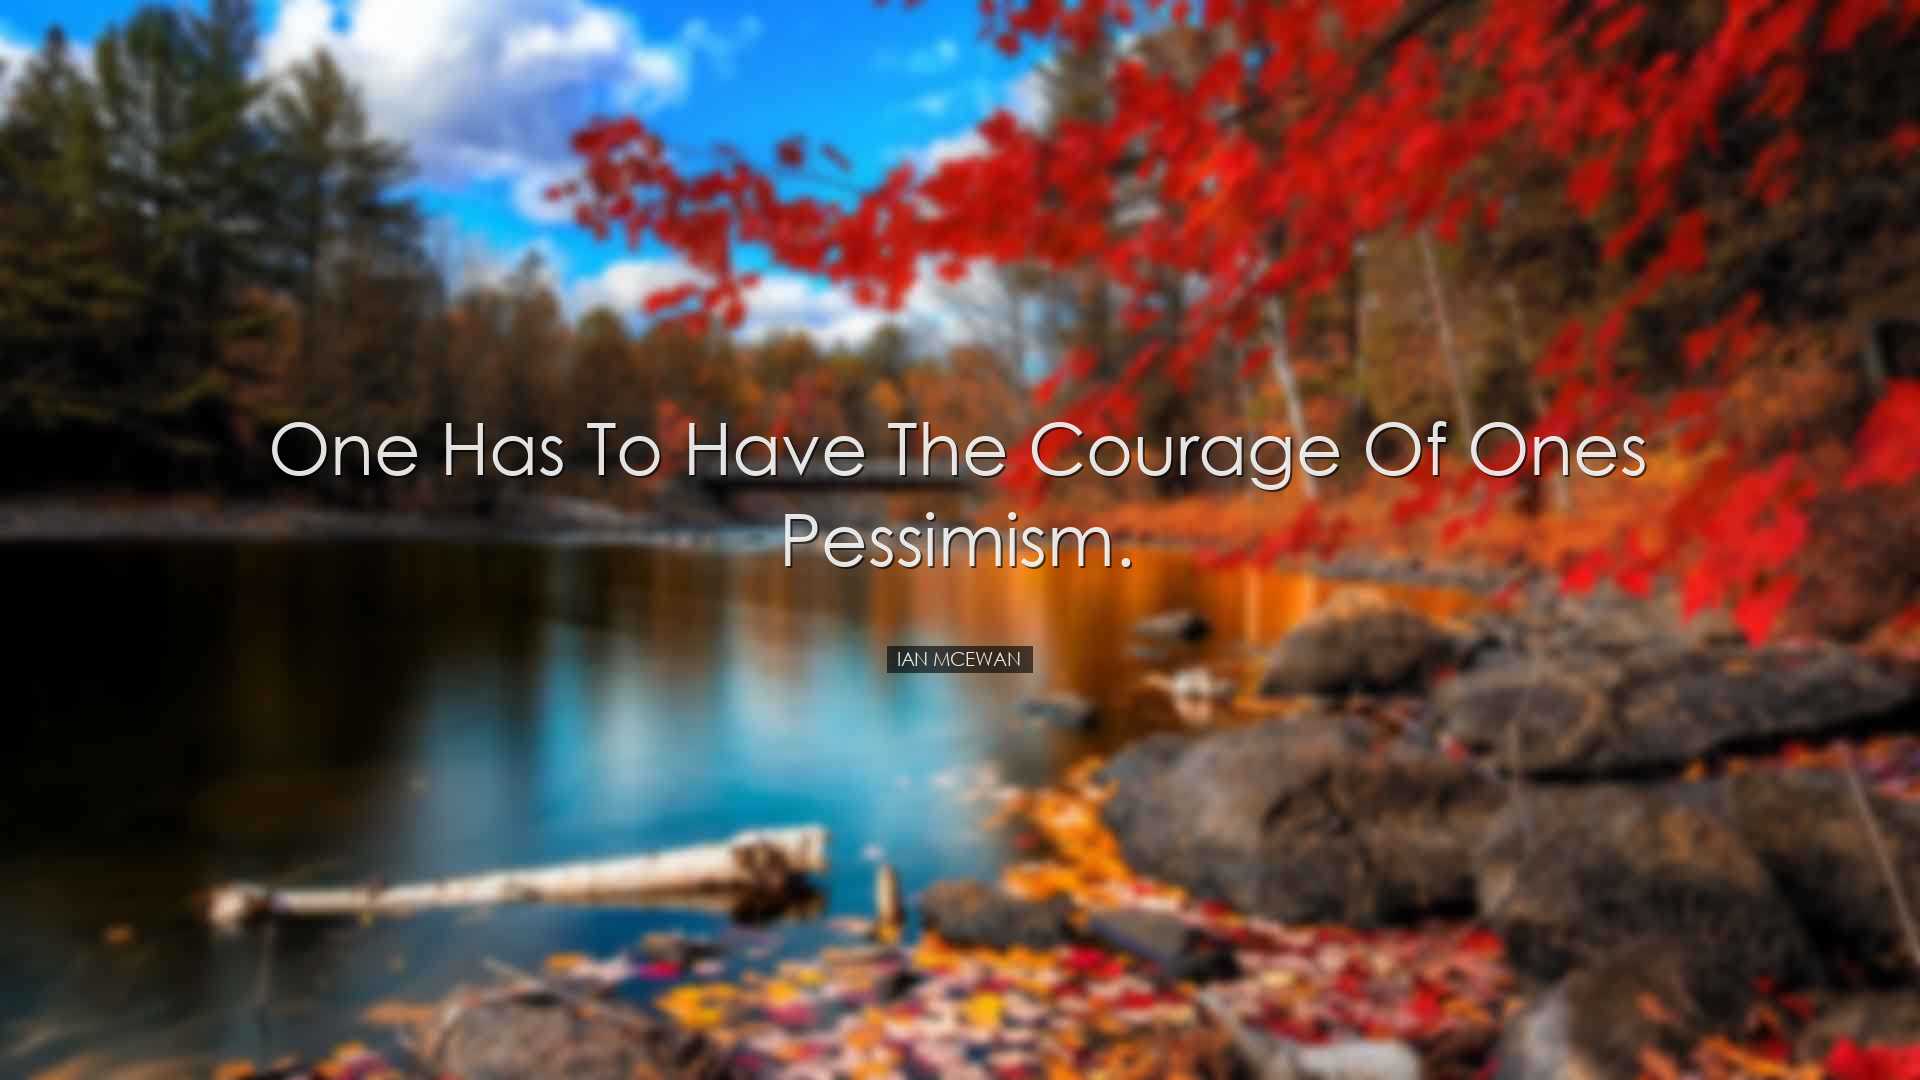 One has to have the courage of ones pessimism. - Ian Mcewan